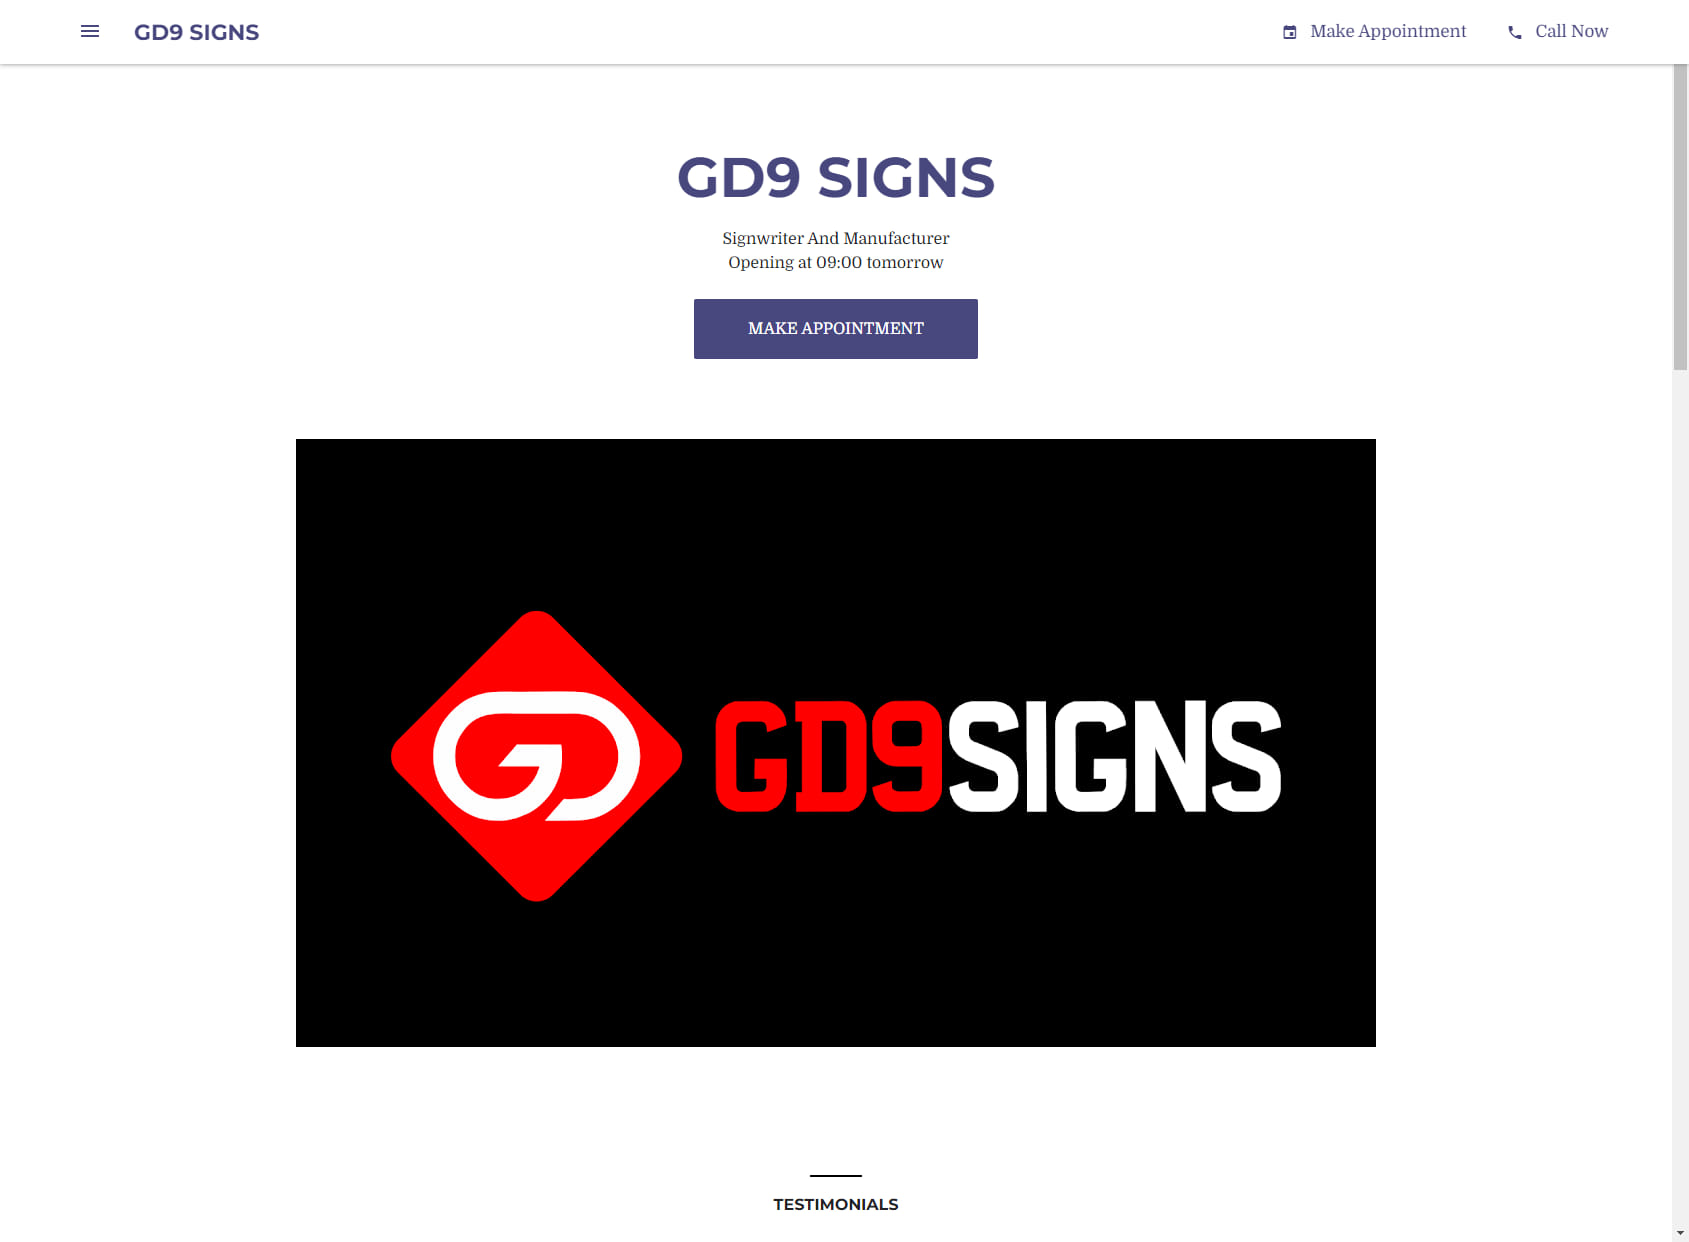 GD9 SIGNS